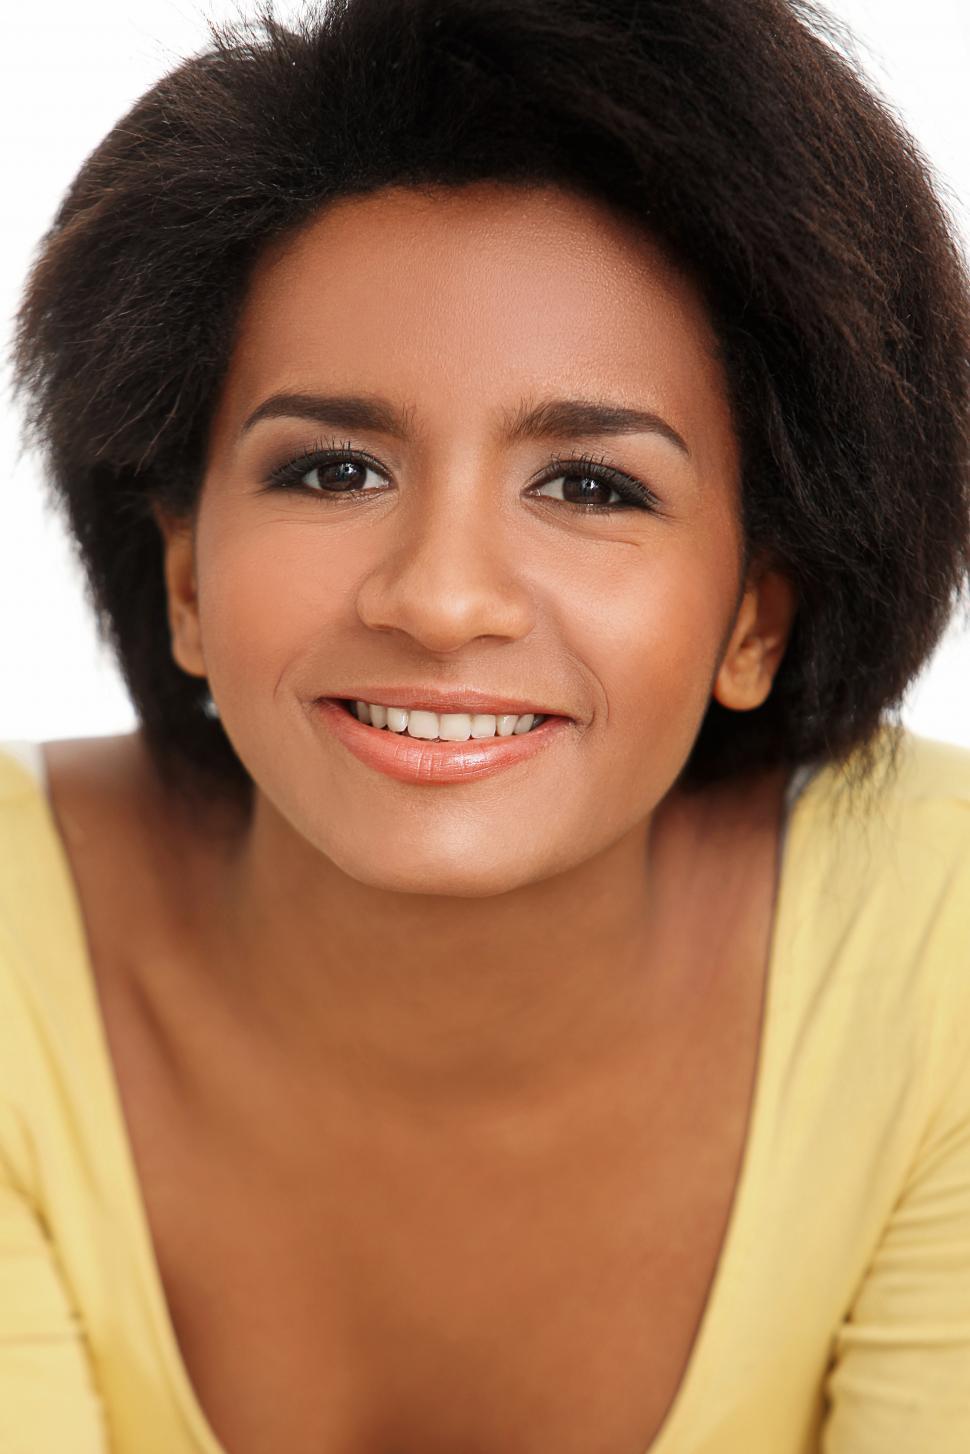 Free Image of Headshot. Happy young woman. 